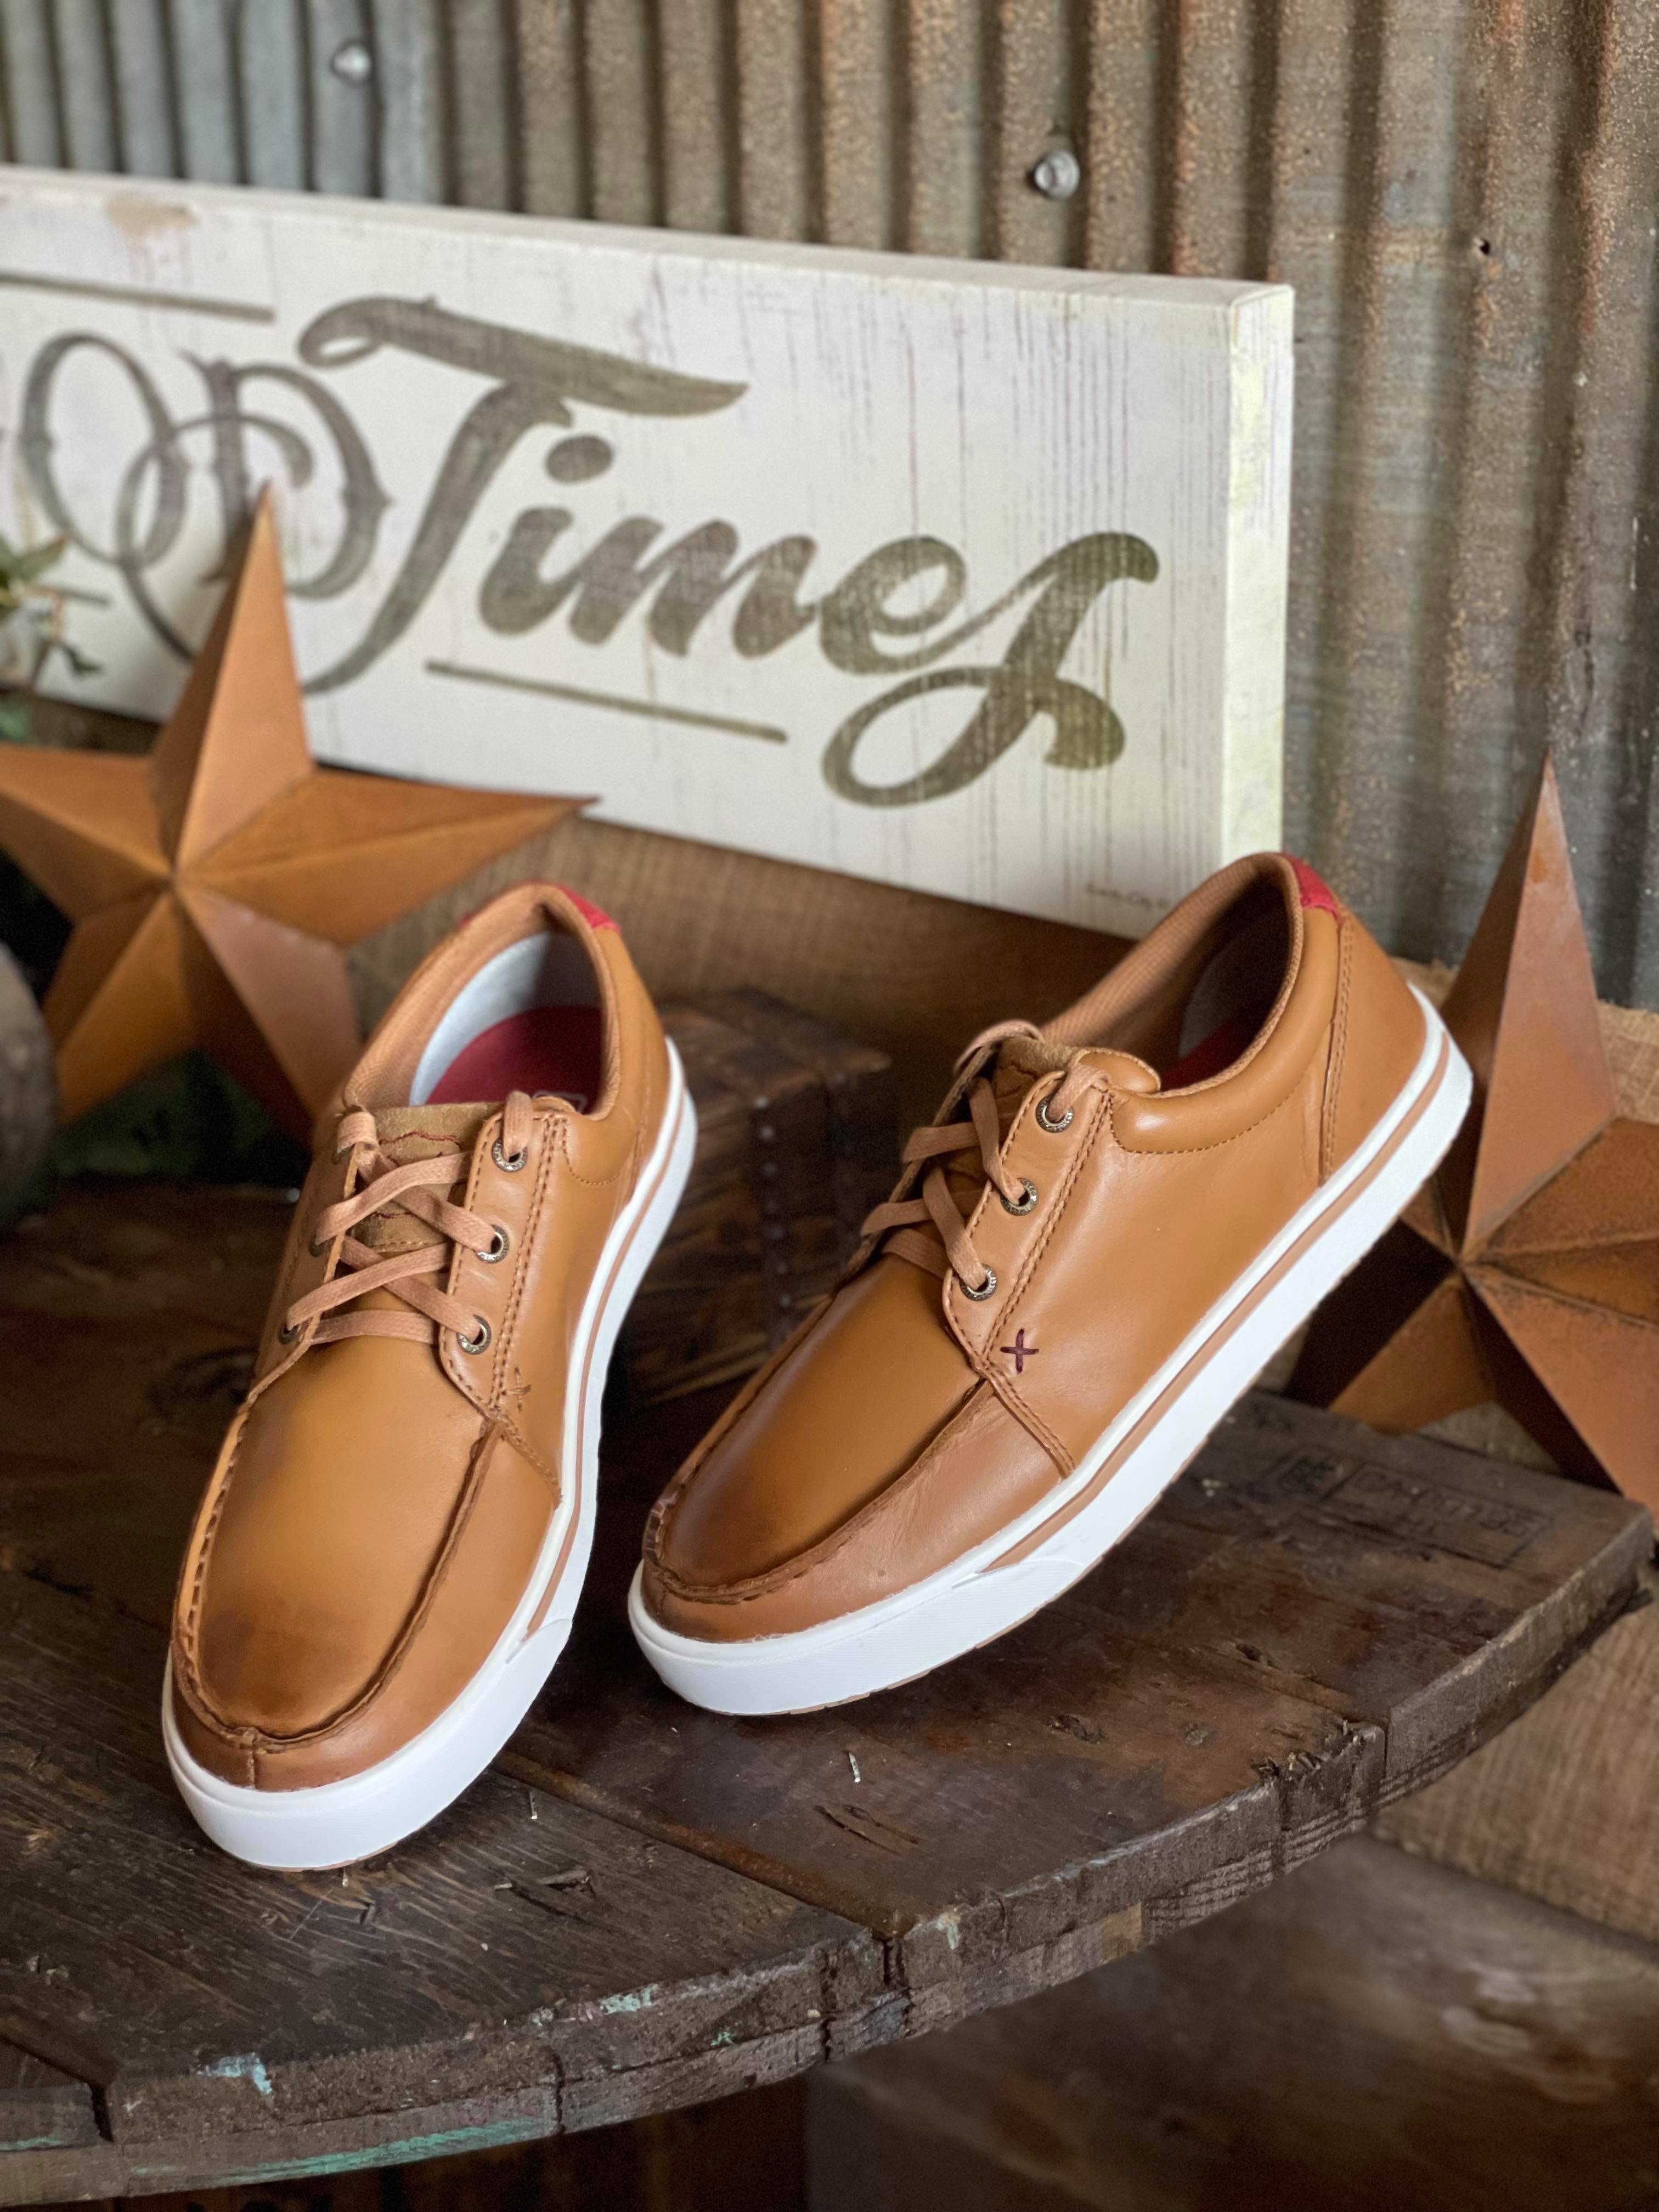 Men's Twisted X Leather Burnished Toe *FINAL SALE*-Men's Casual Shoes-Twisted X Boots-Lucky J Boots & More, Women's, Men's, & Kids Western Store Located in Carthage, MO